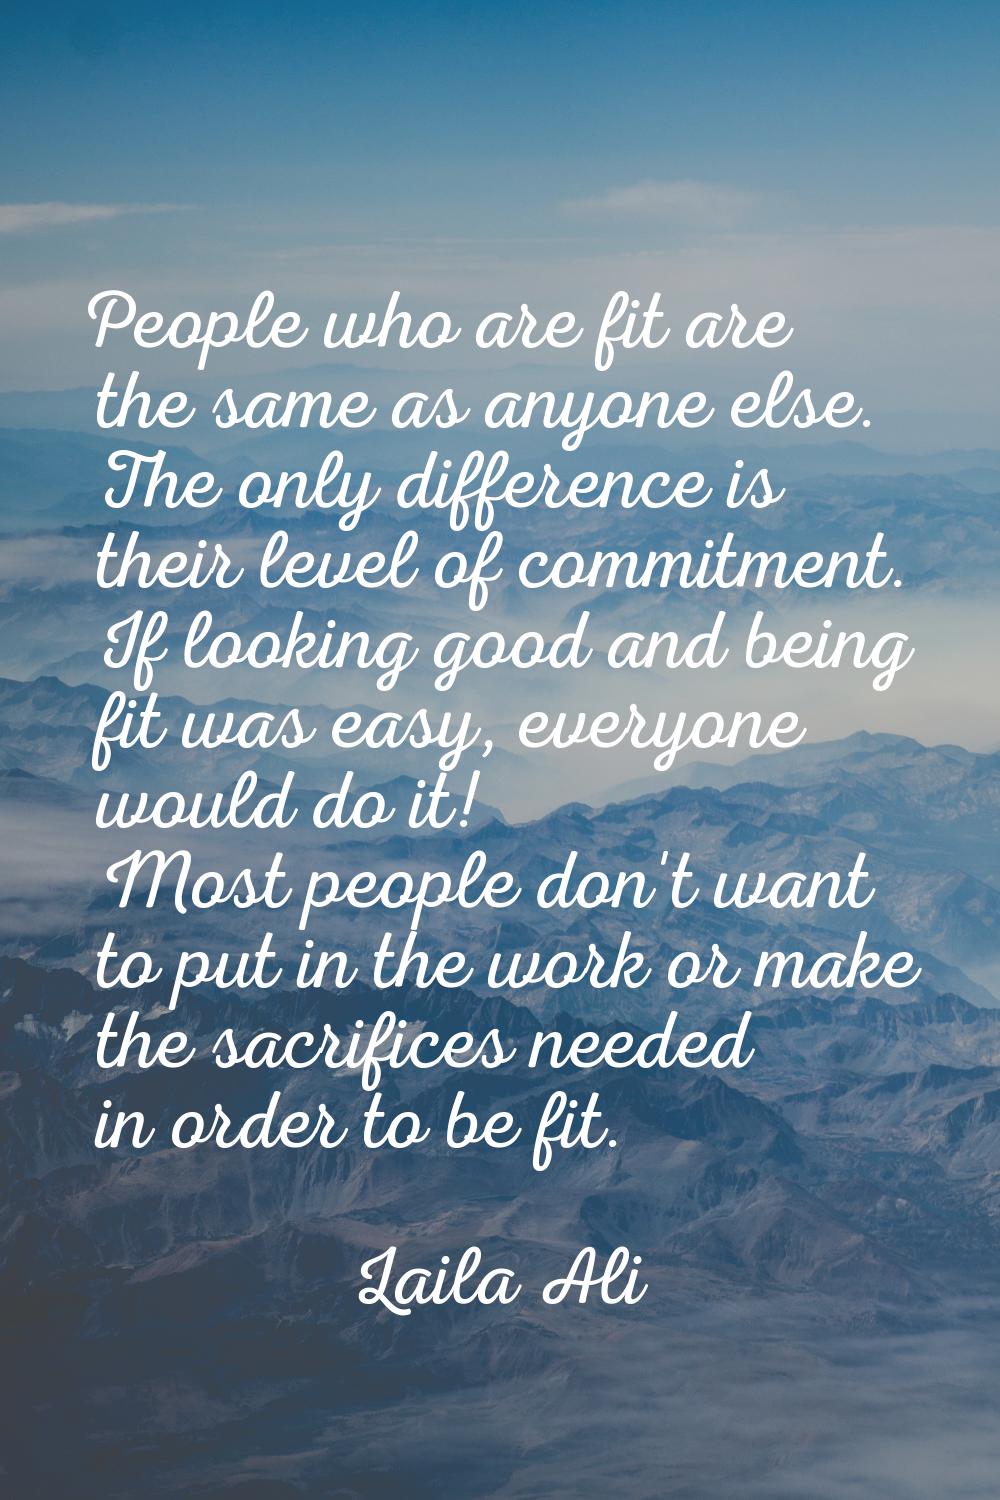 People who are fit are the same as anyone else. The only difference is their level of commitment. I